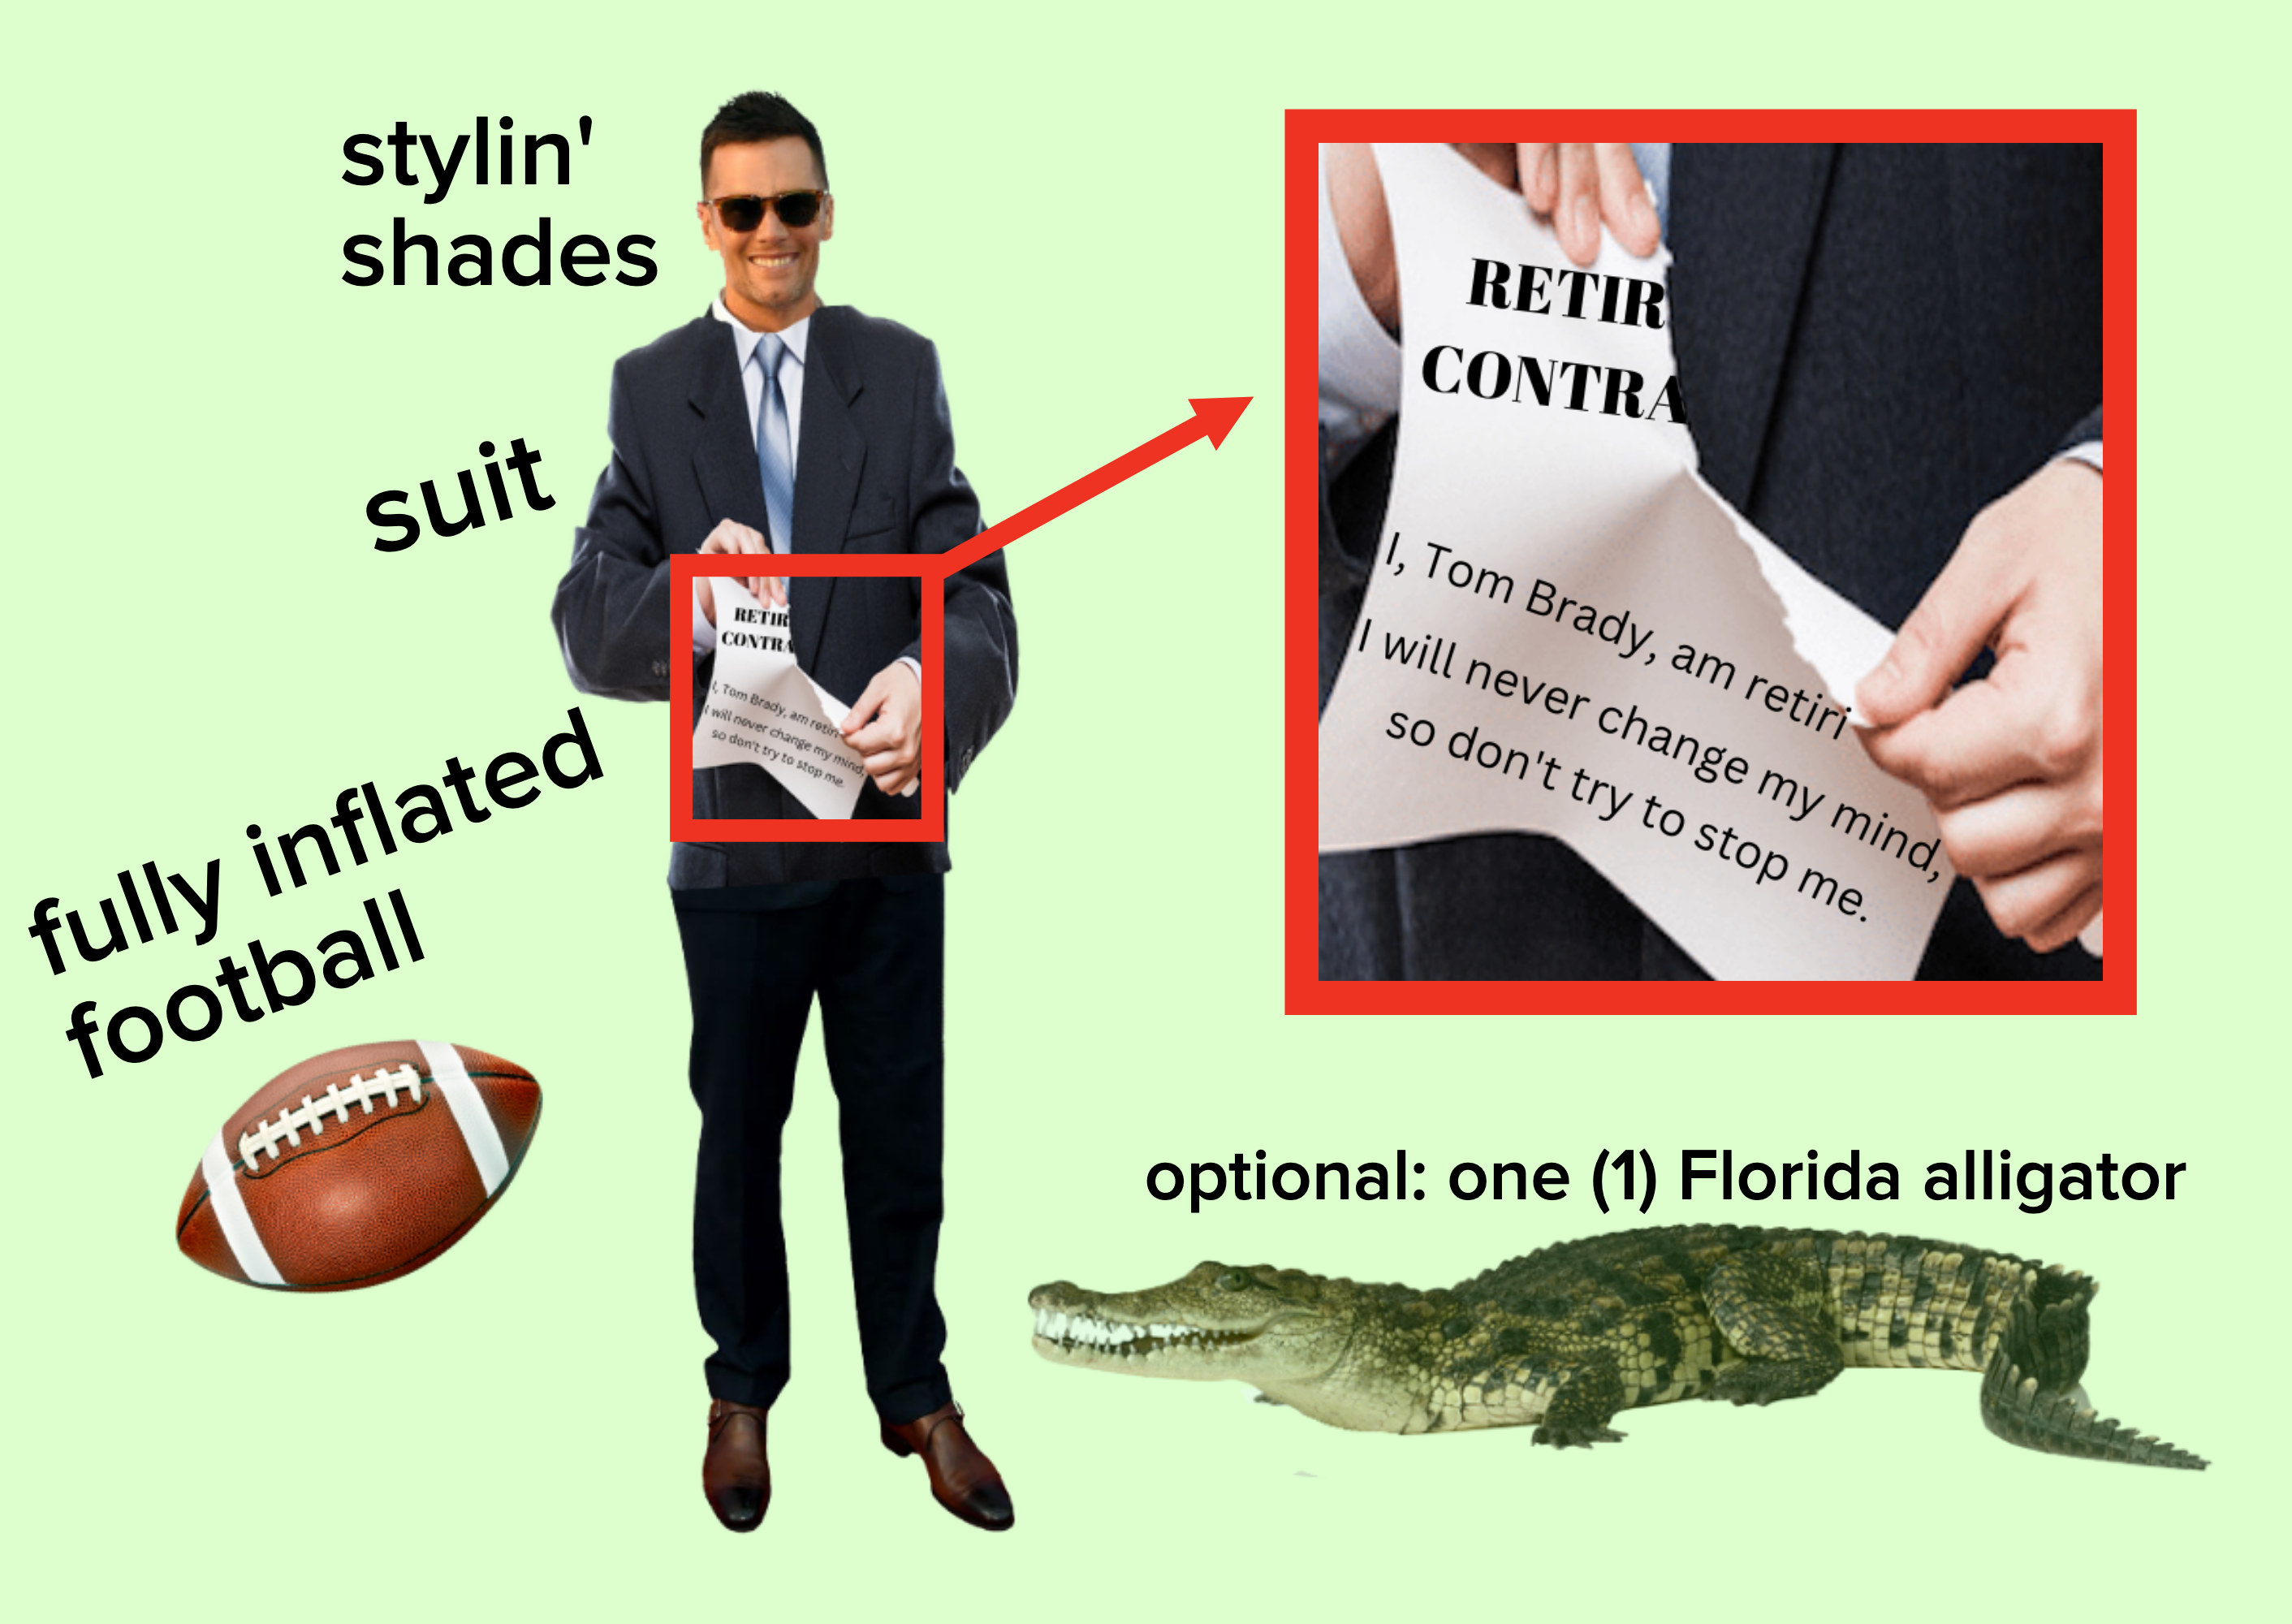 graphic of tom brady and the fully inflated football, ripped papers, and shades you could also use for props